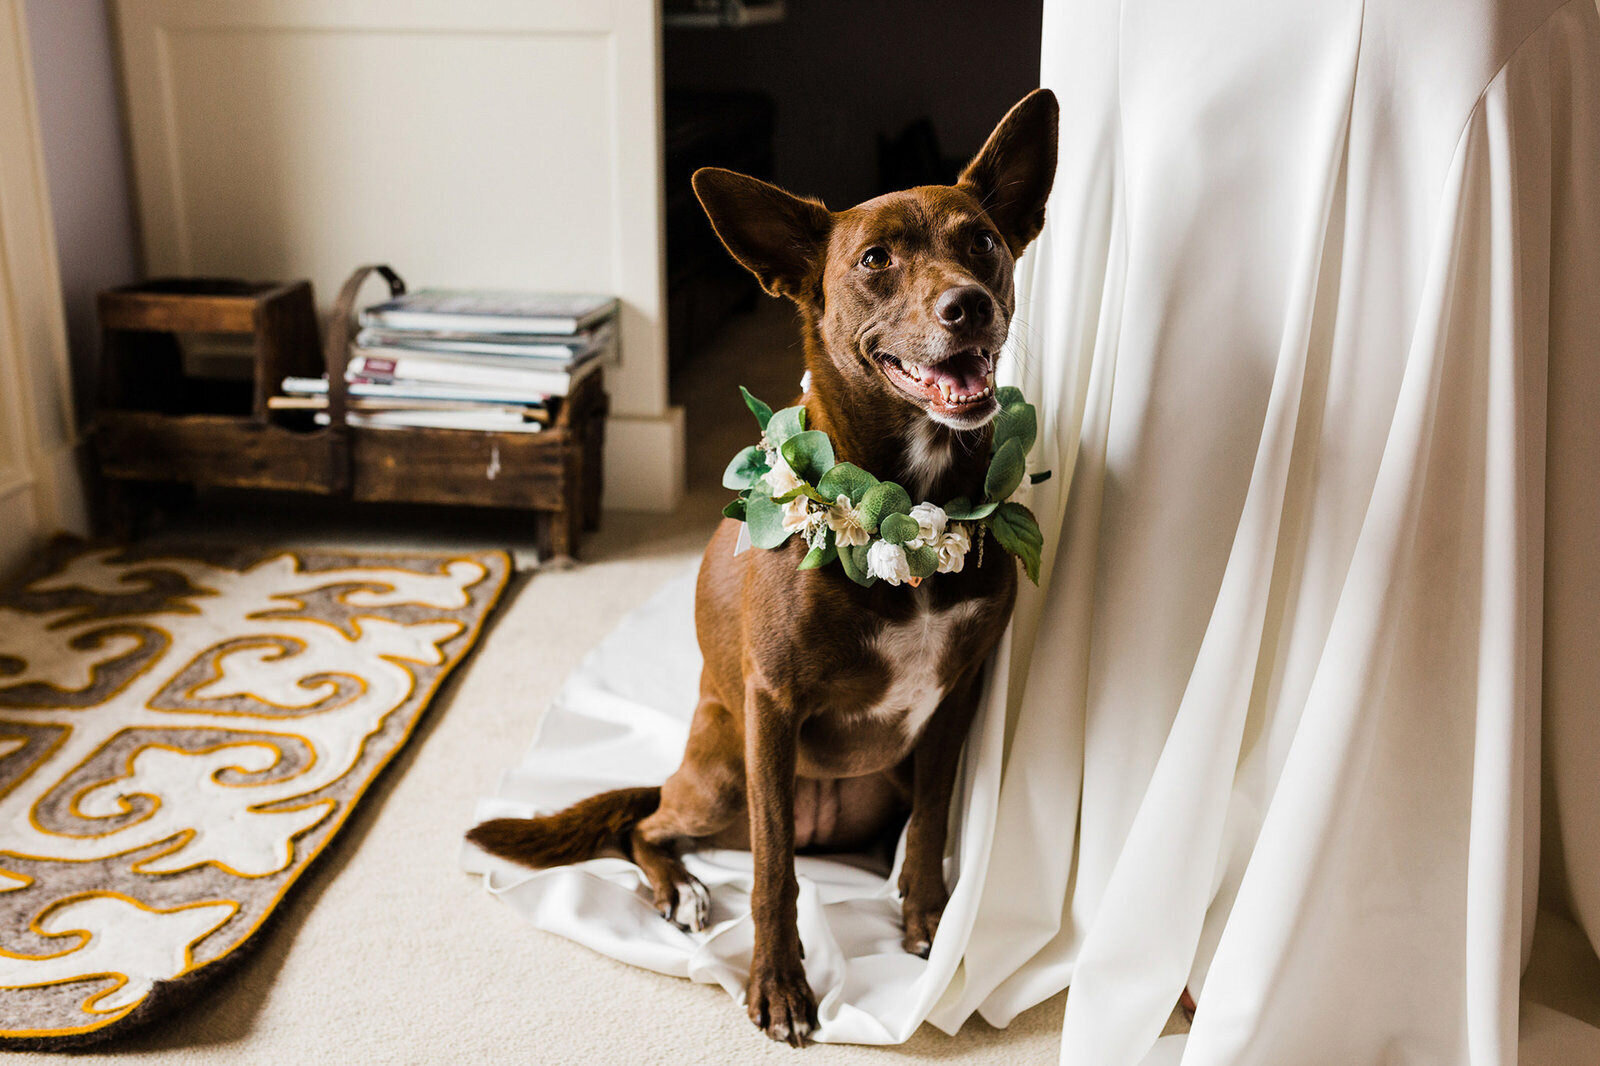 Pacific Northwest elopement photographer captured this sweet photo of a bride's dog wearing a flower collar